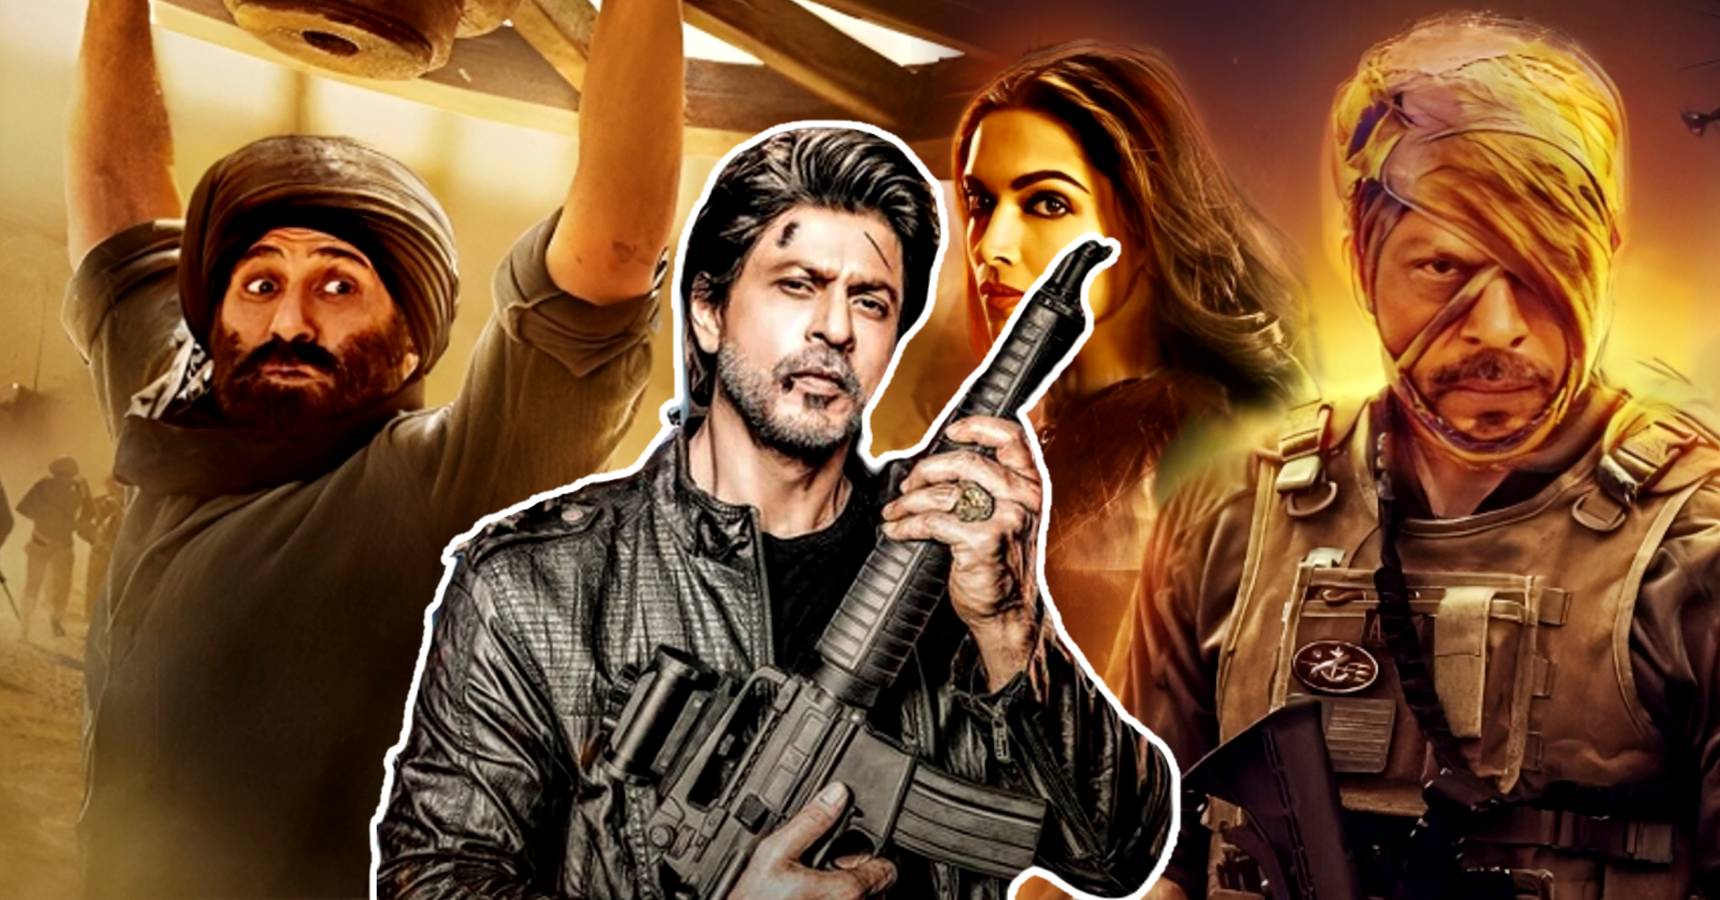 Bollywood actor Shah Rukh Khan Jawan overtakes Pathaan in advance booking collection